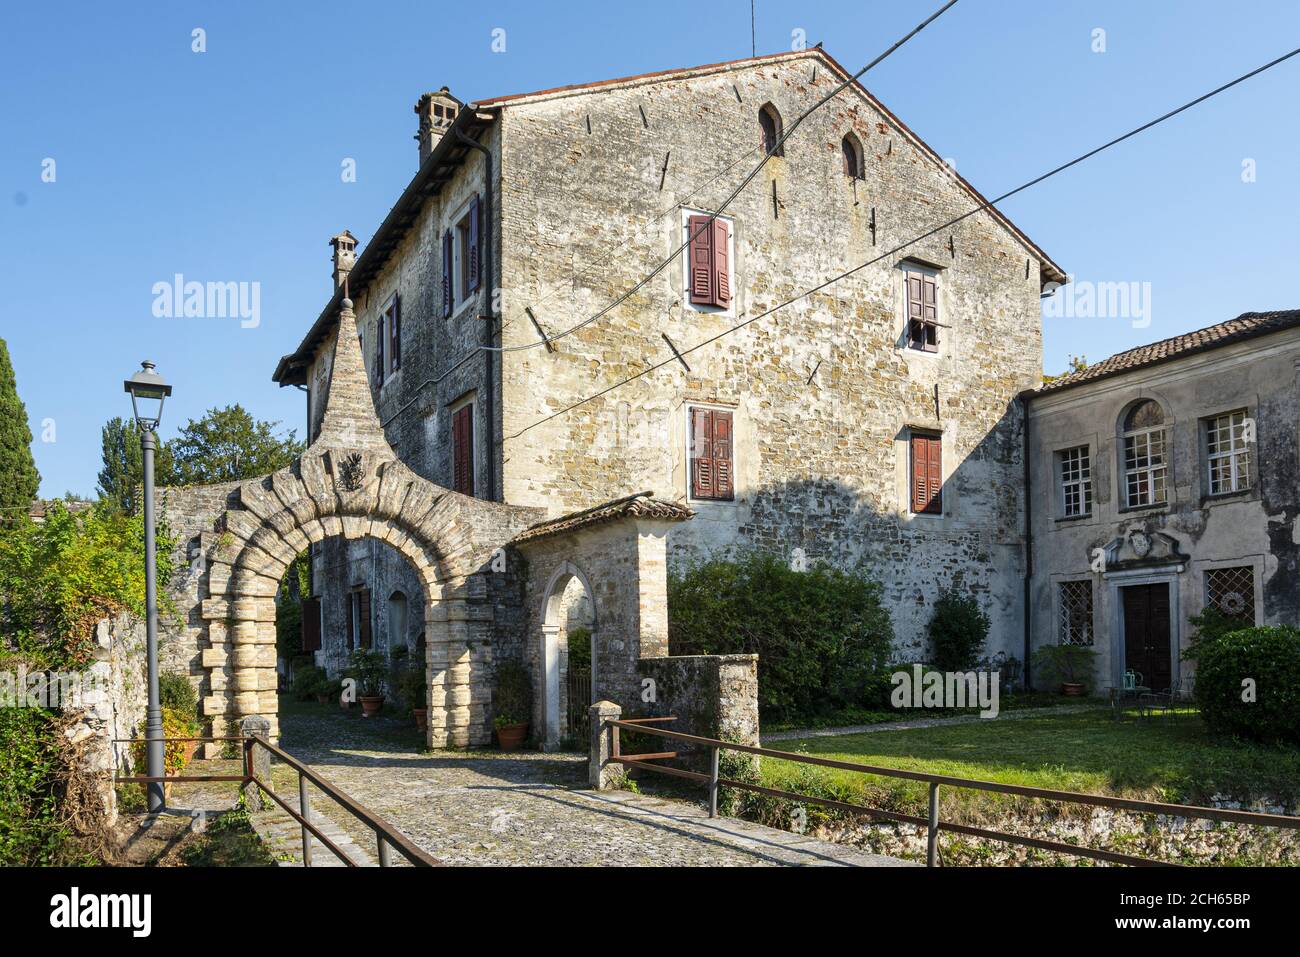 ancient entrance gate to the medieval rural village of Strassoldo, Italy Stock Photo